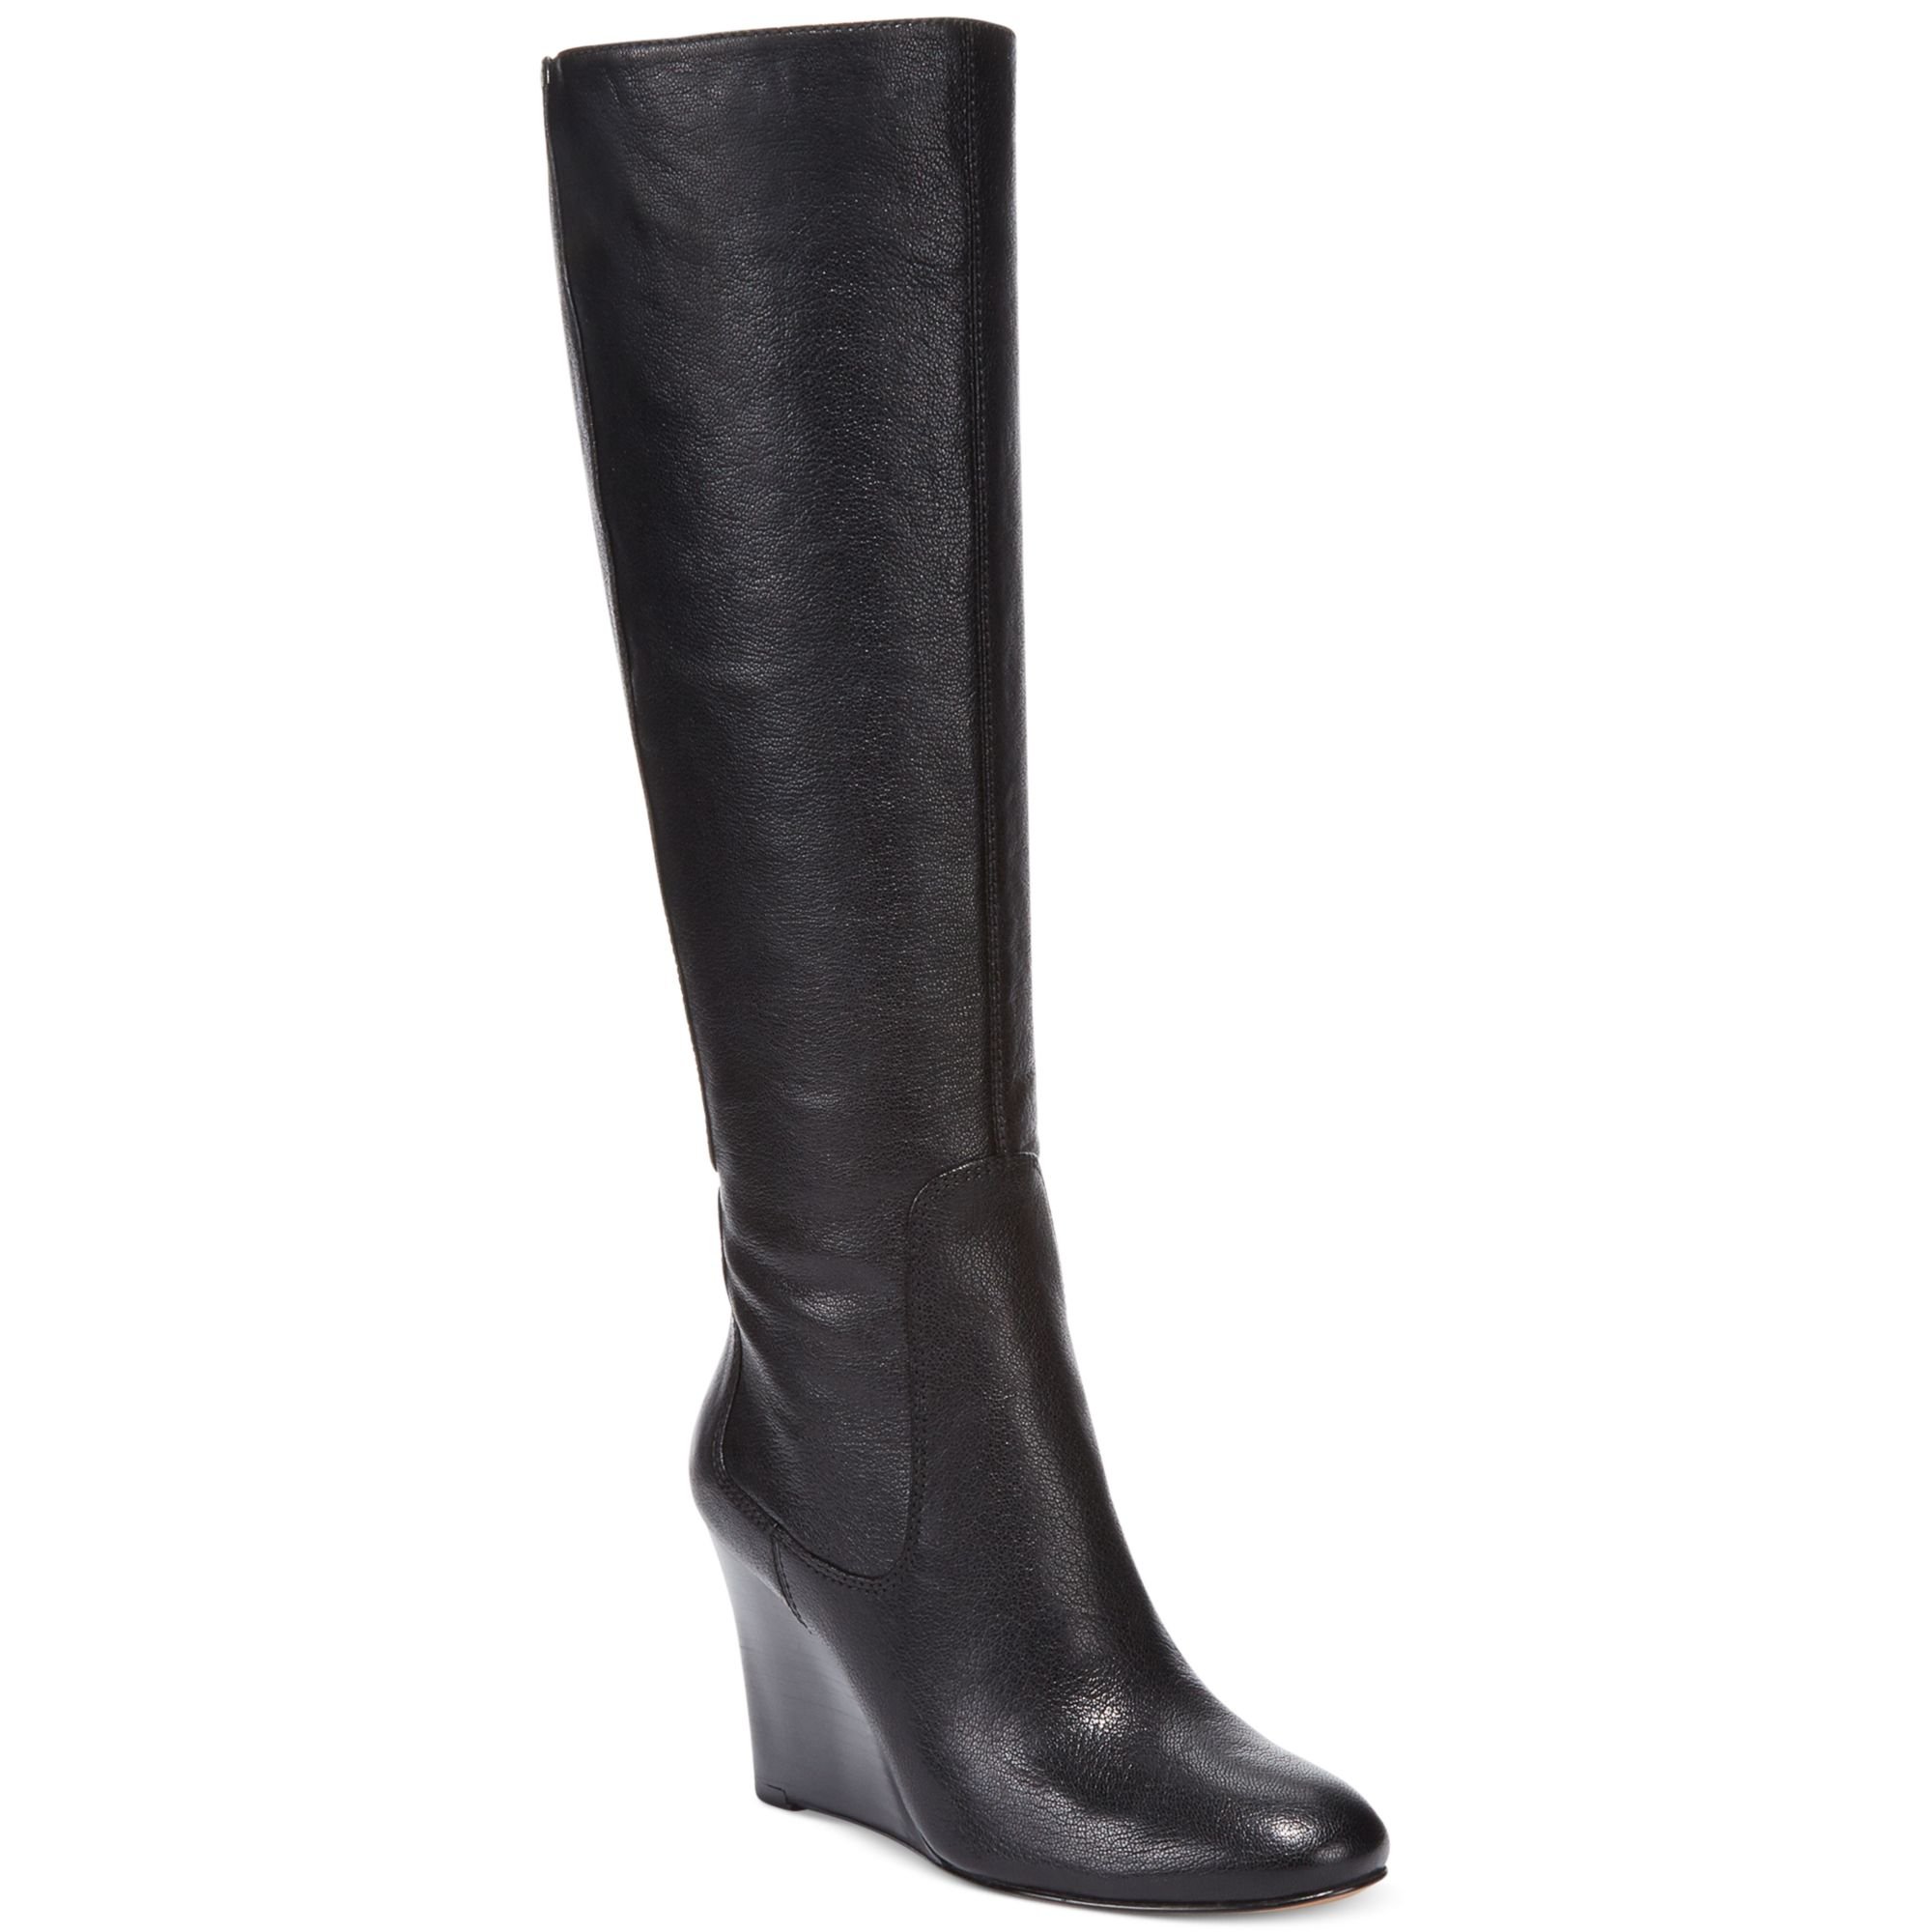 Nine West Heartset Tall Wedge Dress Boots in Black (Black Leather) | Lyst